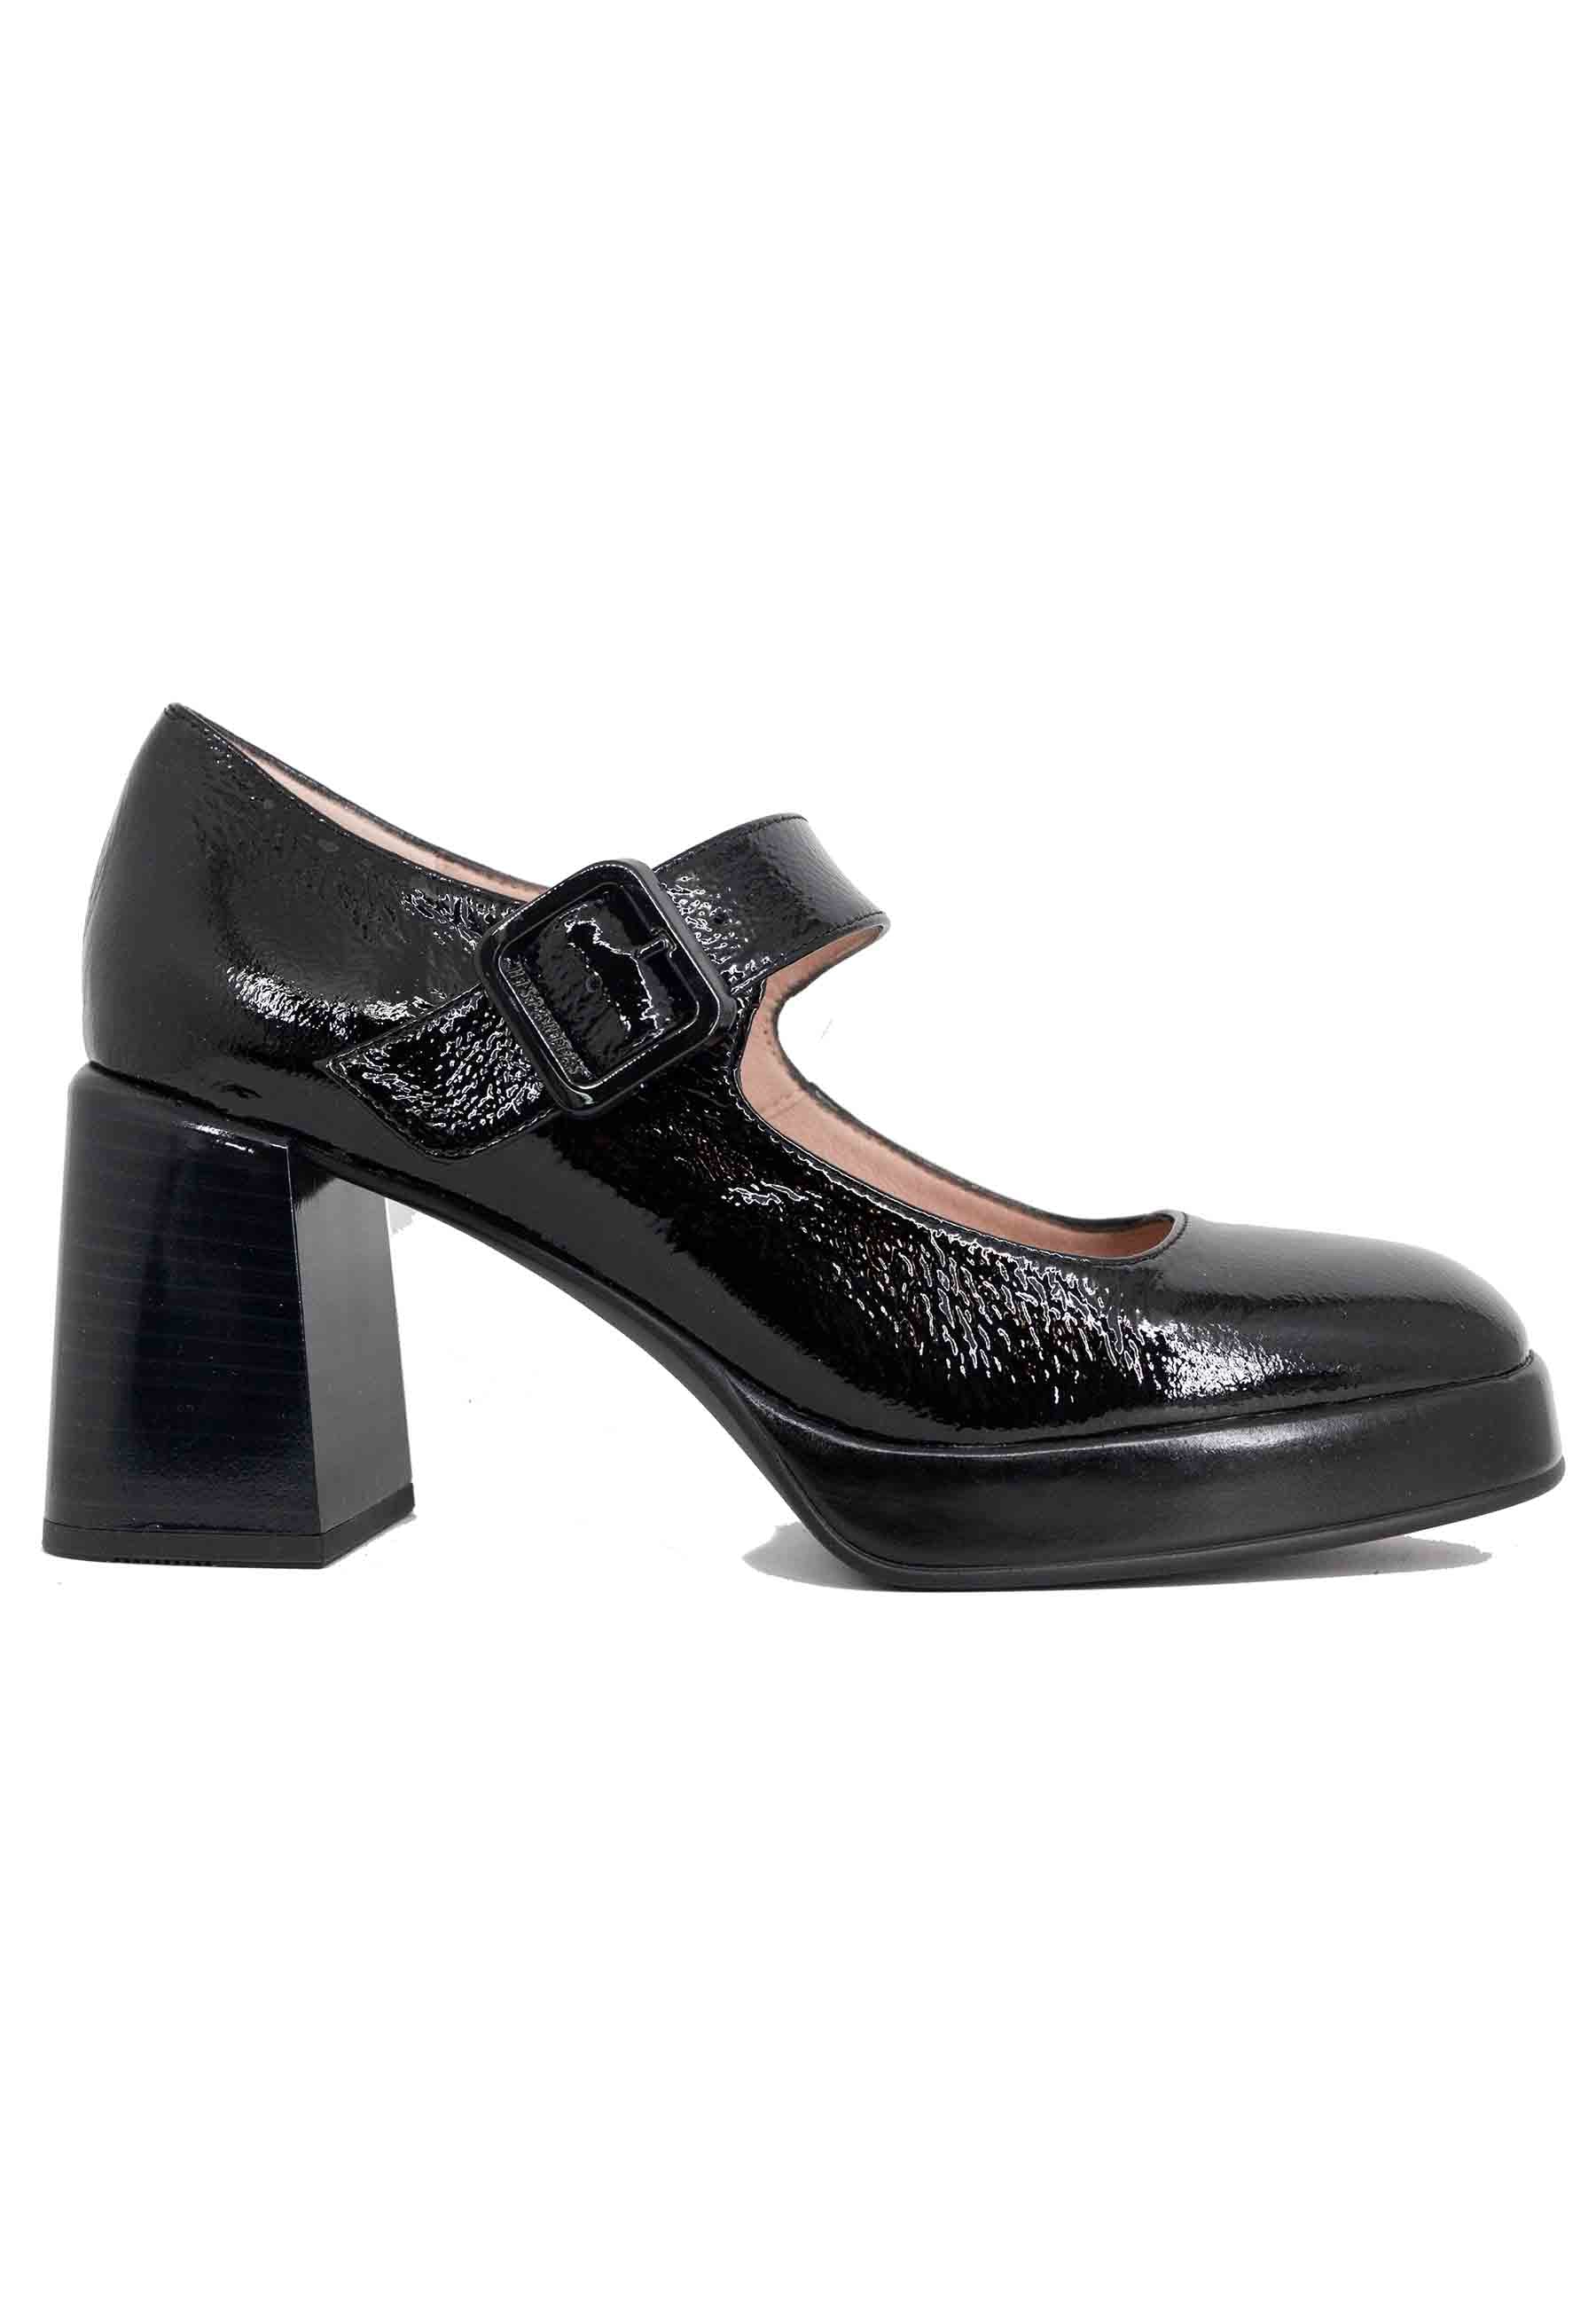 Women's black leather pumps with heel and plateau